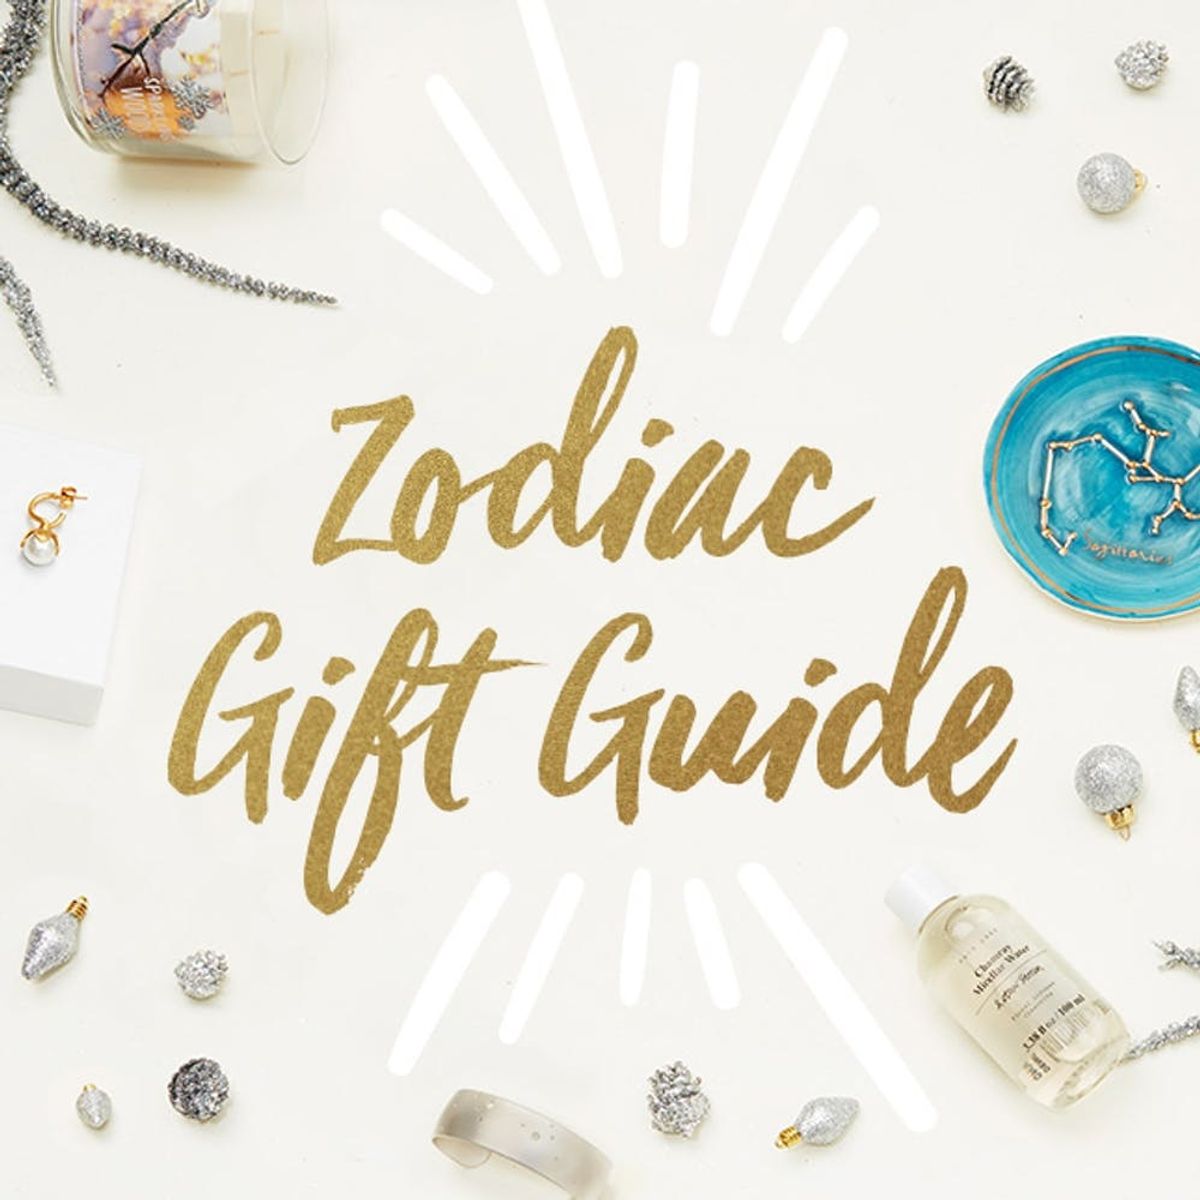 The Ultimate Zodiac Gifts for Your Favorite Sign